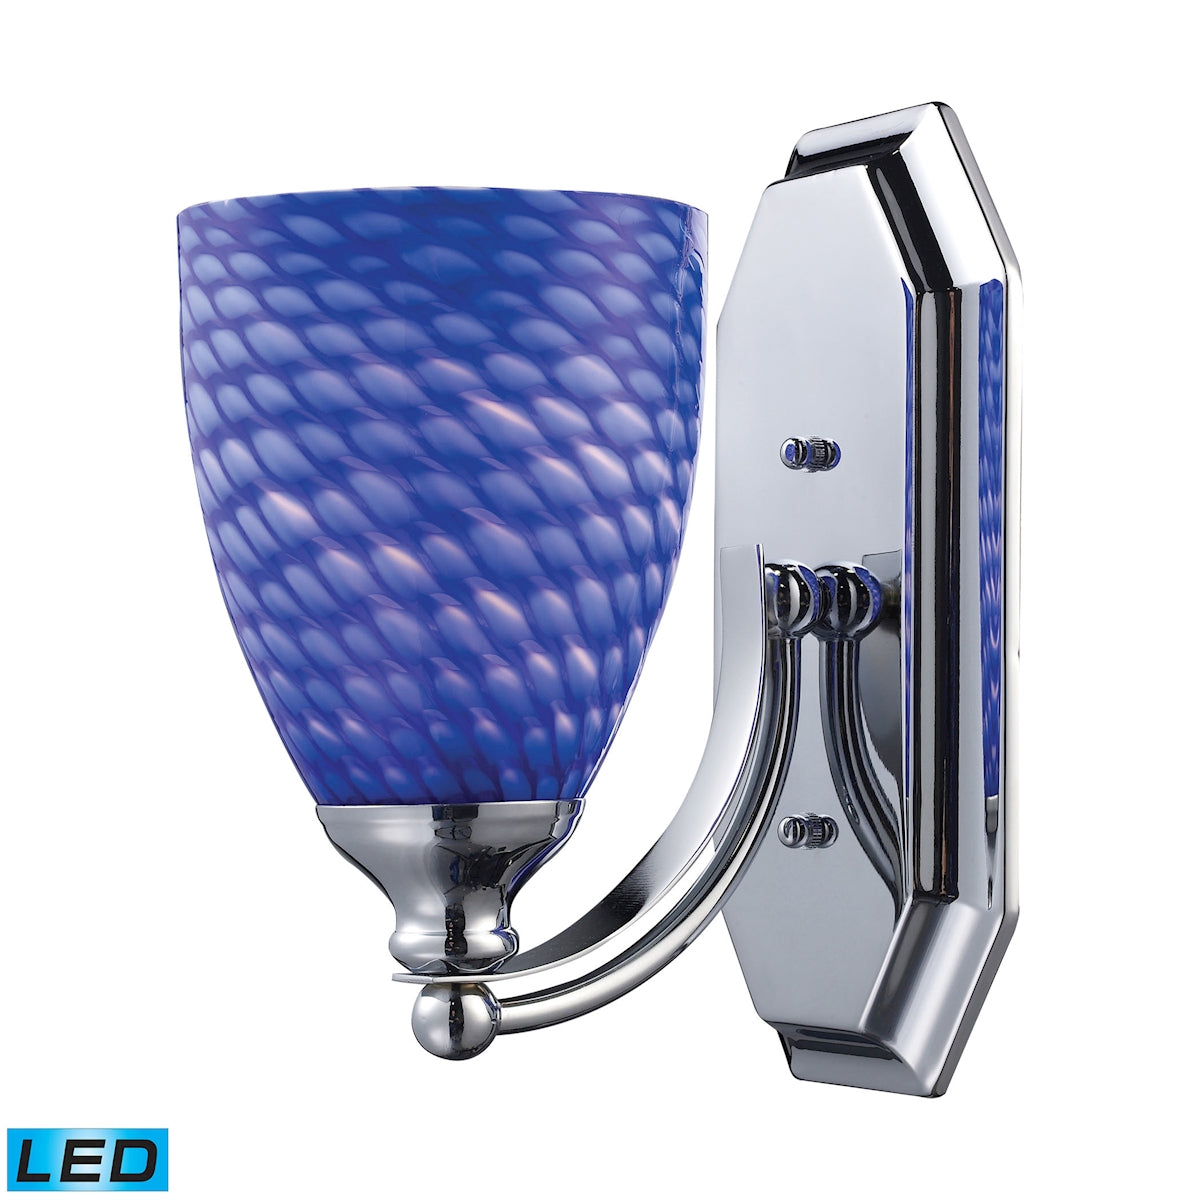 Mix and Match Vanity 1-Light Wall Lamp in Chrome with Sapphire Glass - Includes LED Bulb